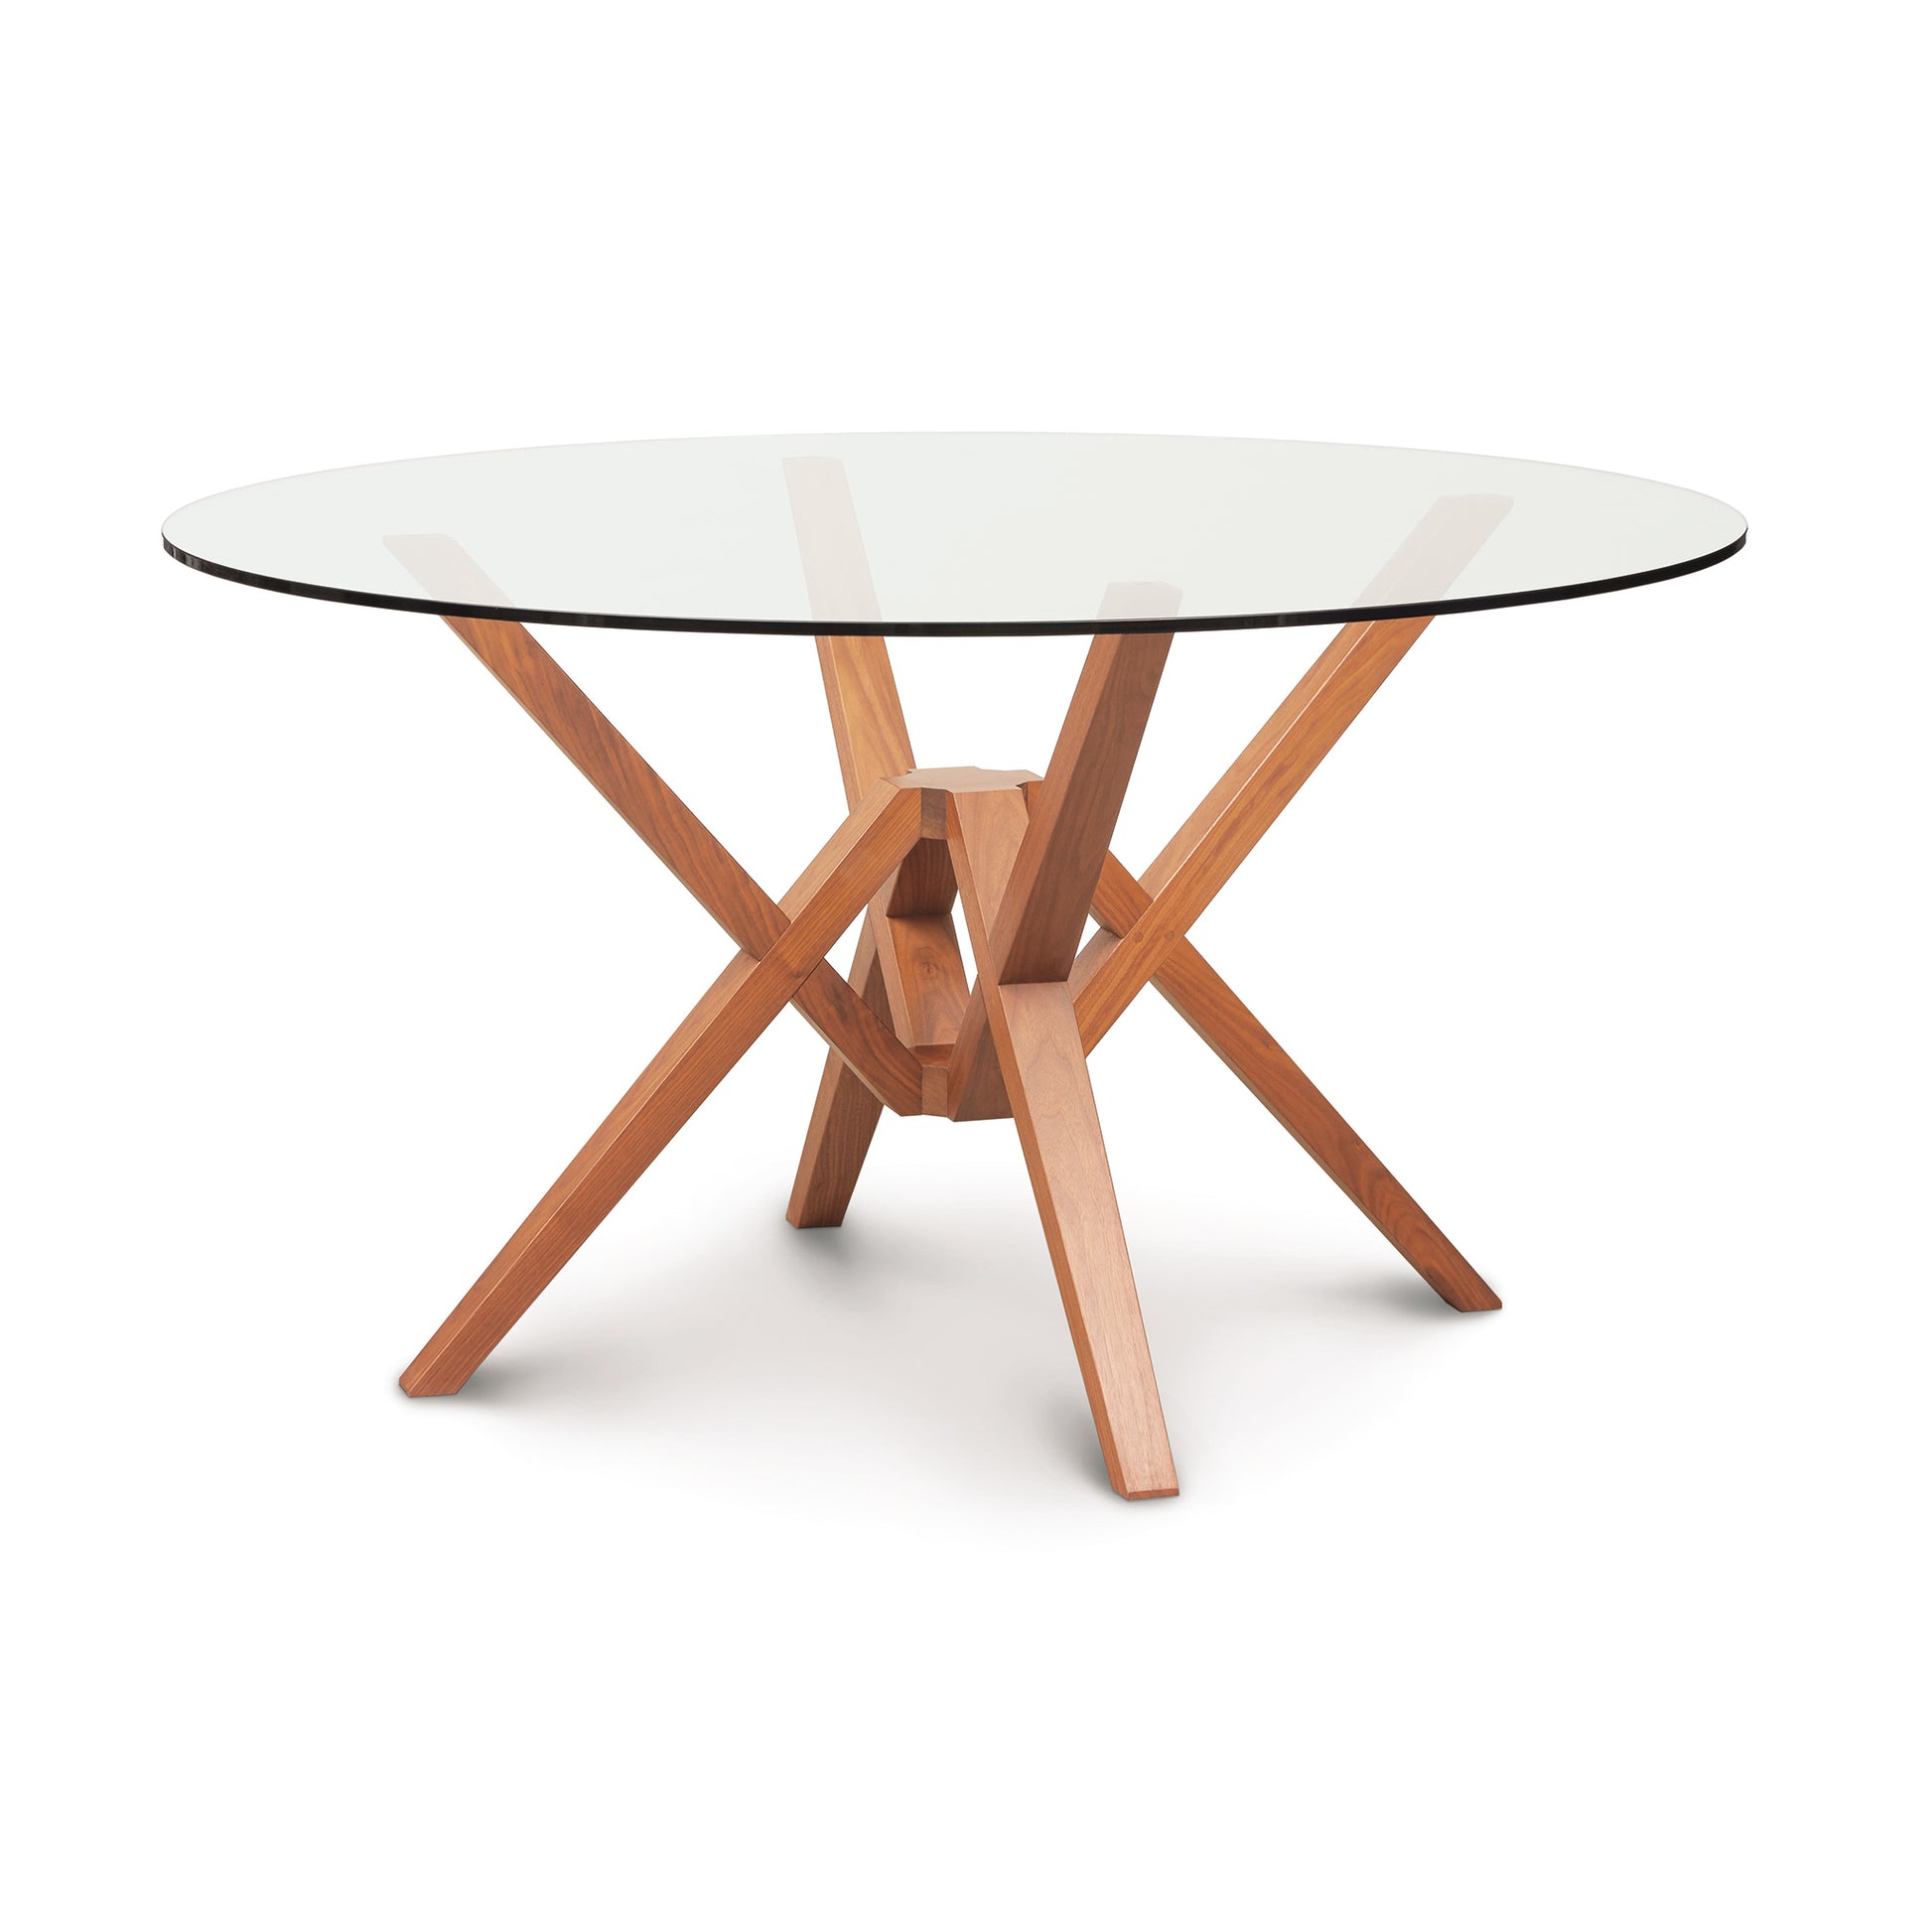 A round glass dining table with wooden legs.